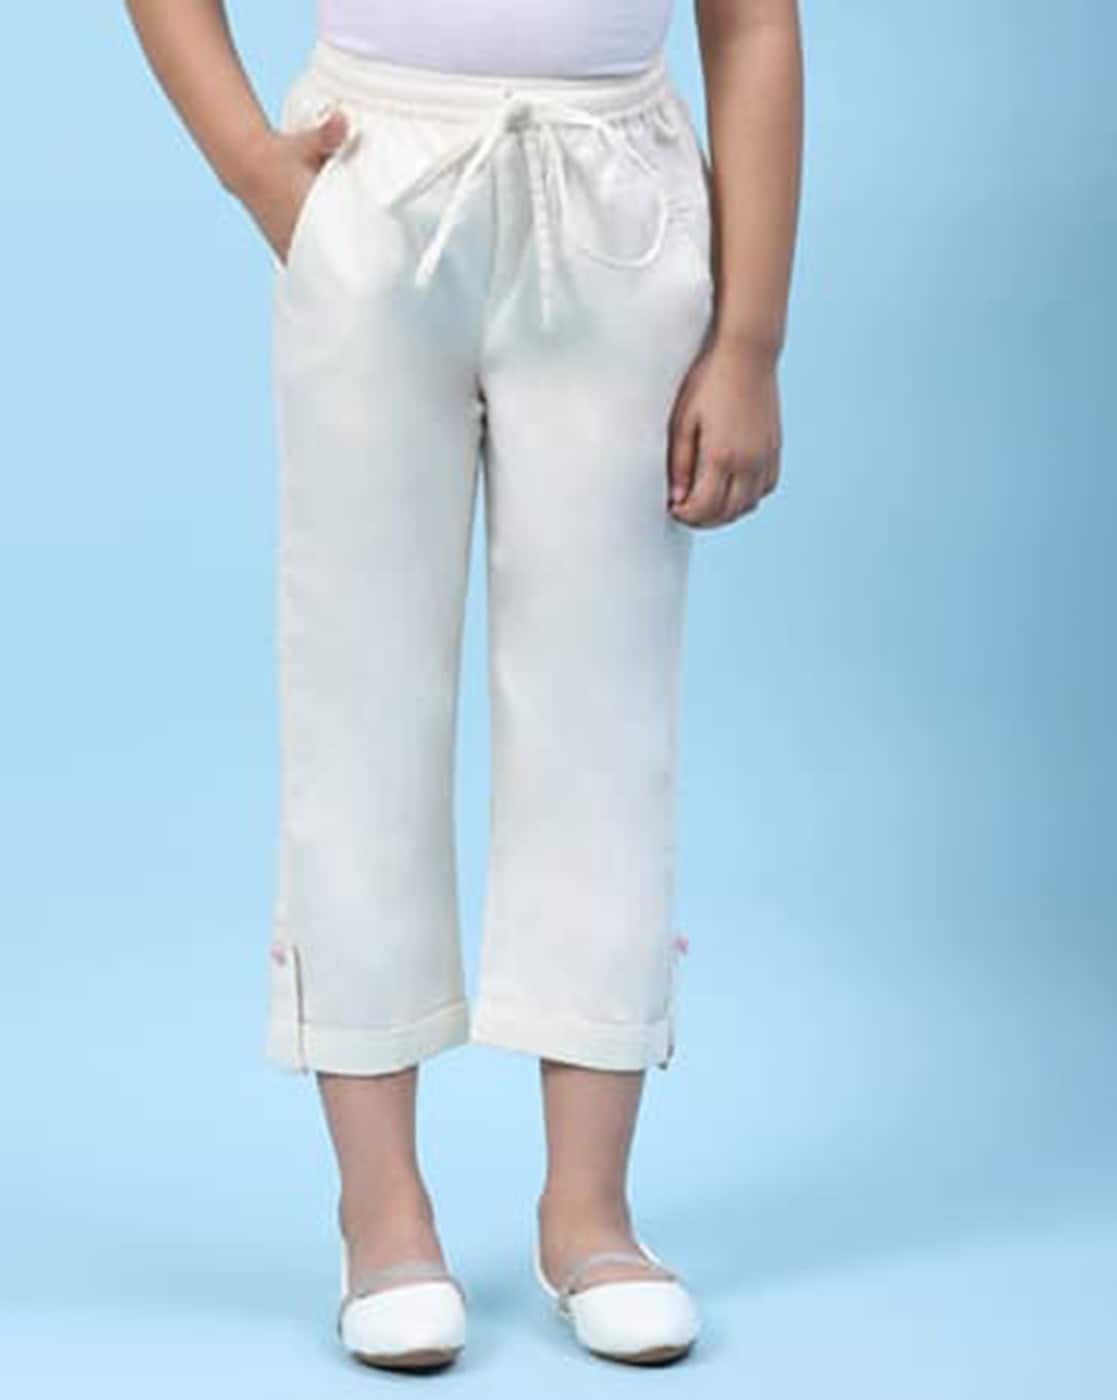 Cotton White Pants Cotton Half Chickens White Pants For Women  Girls For  Party Wear 